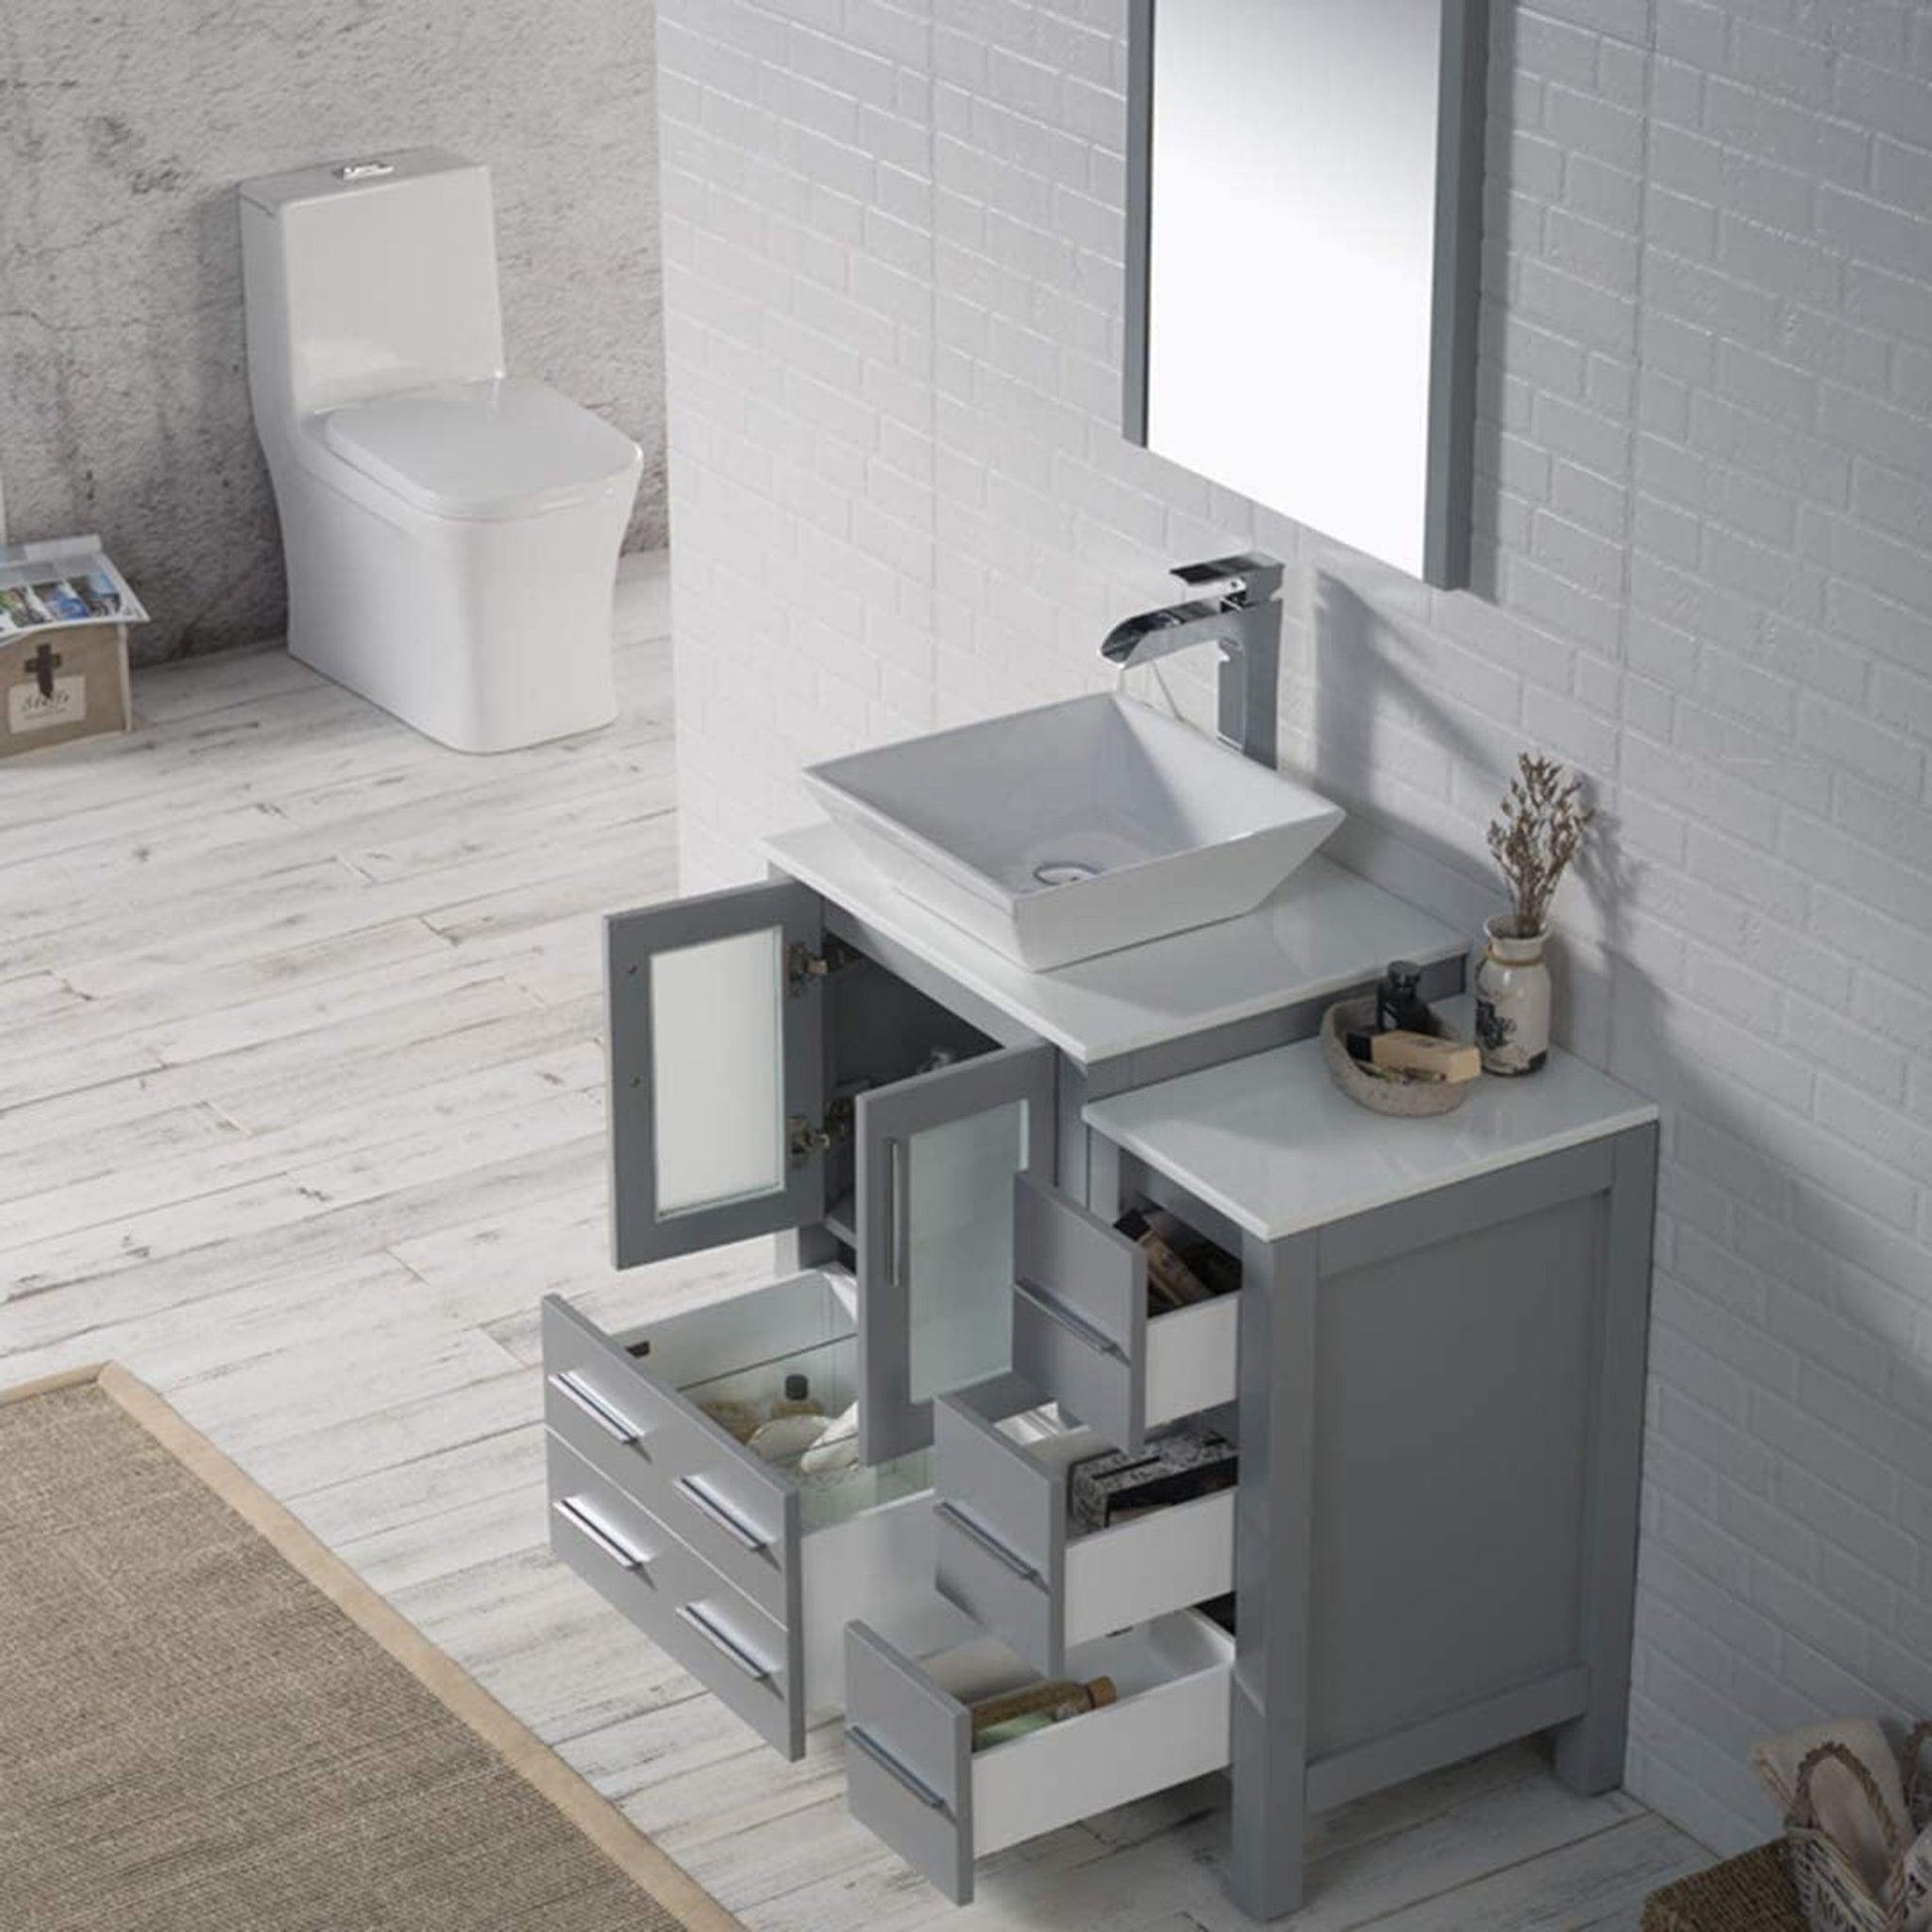 Blossom Sydney 36" Metal Gray Freestanding Vanity Set With Ceramic Vessel Single Sink, Mirror and Side Cabinet